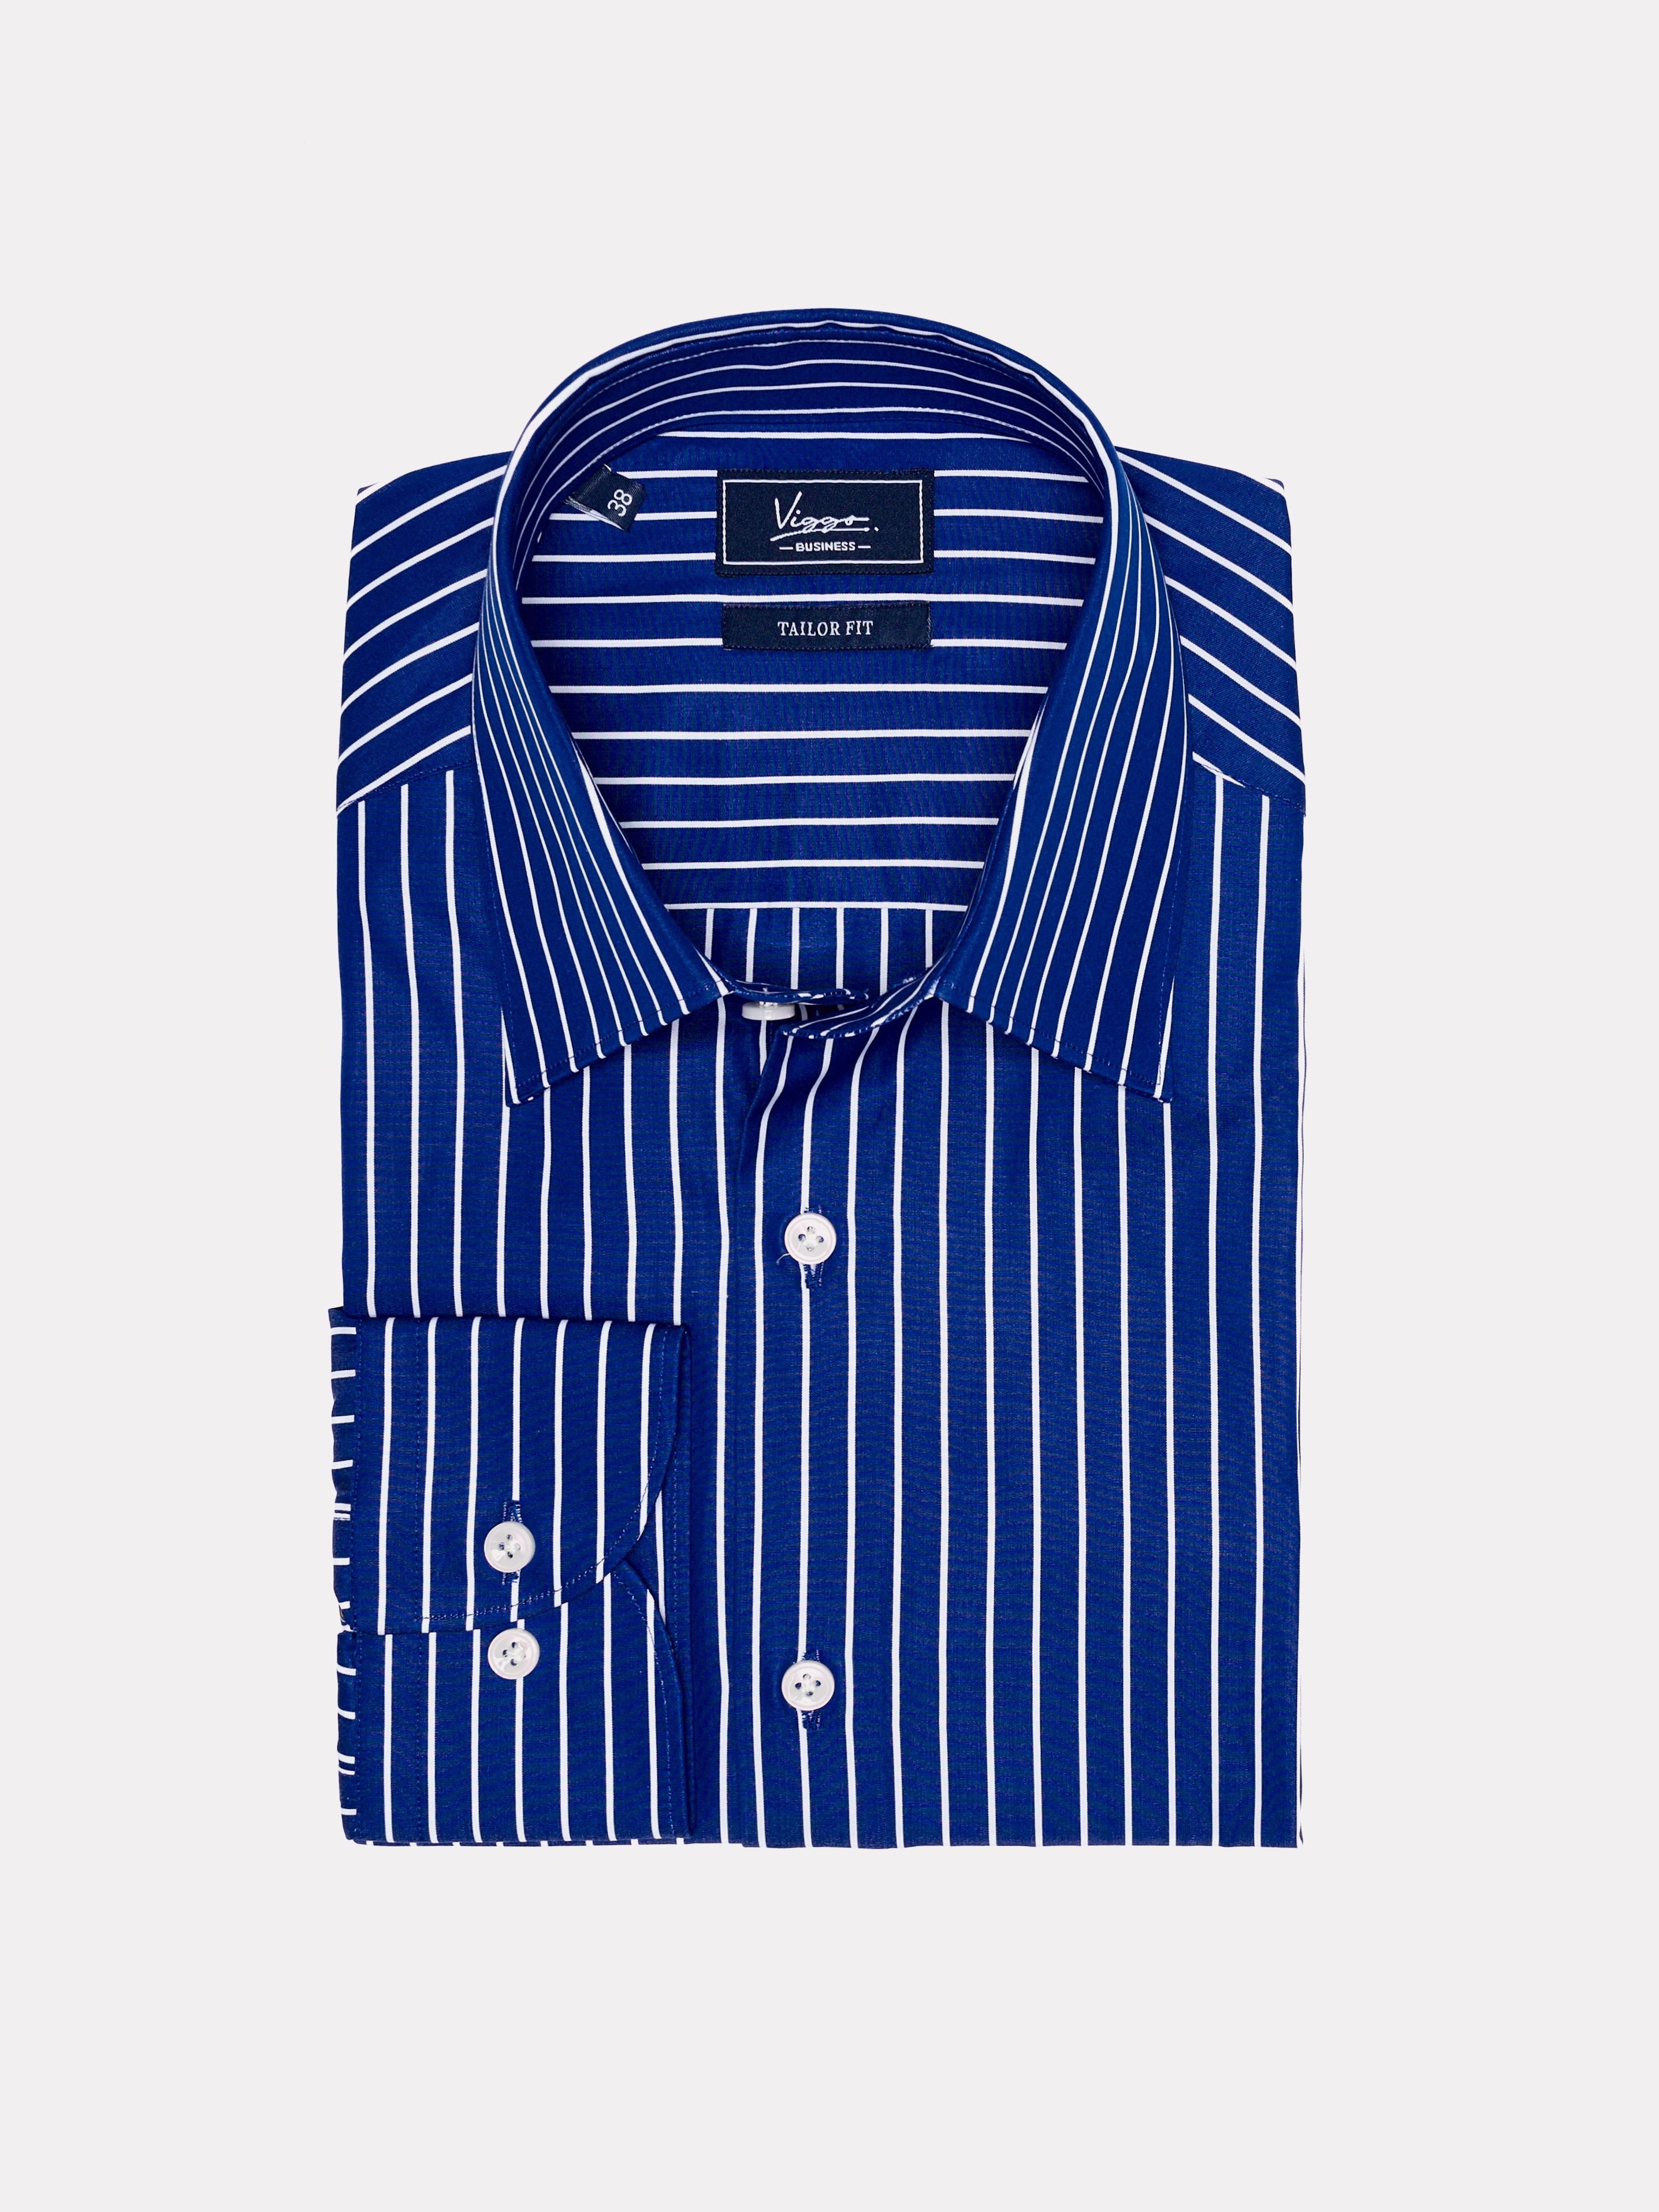 Electric blue shirt with white stripes